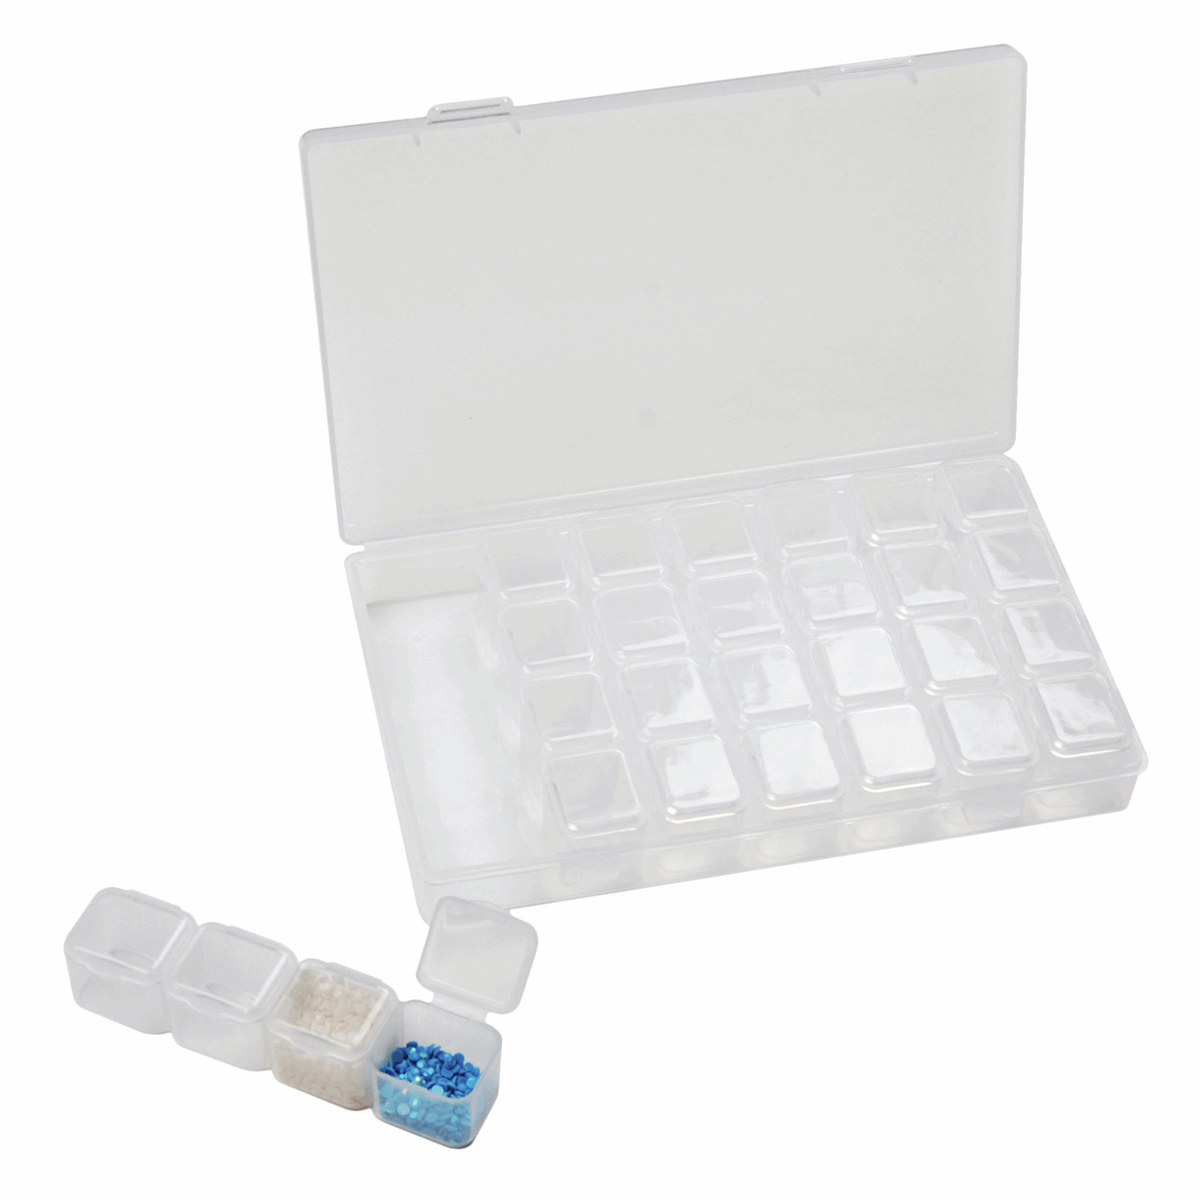 Bead storage box with 7 x 4 individual compartments -  Lanarte